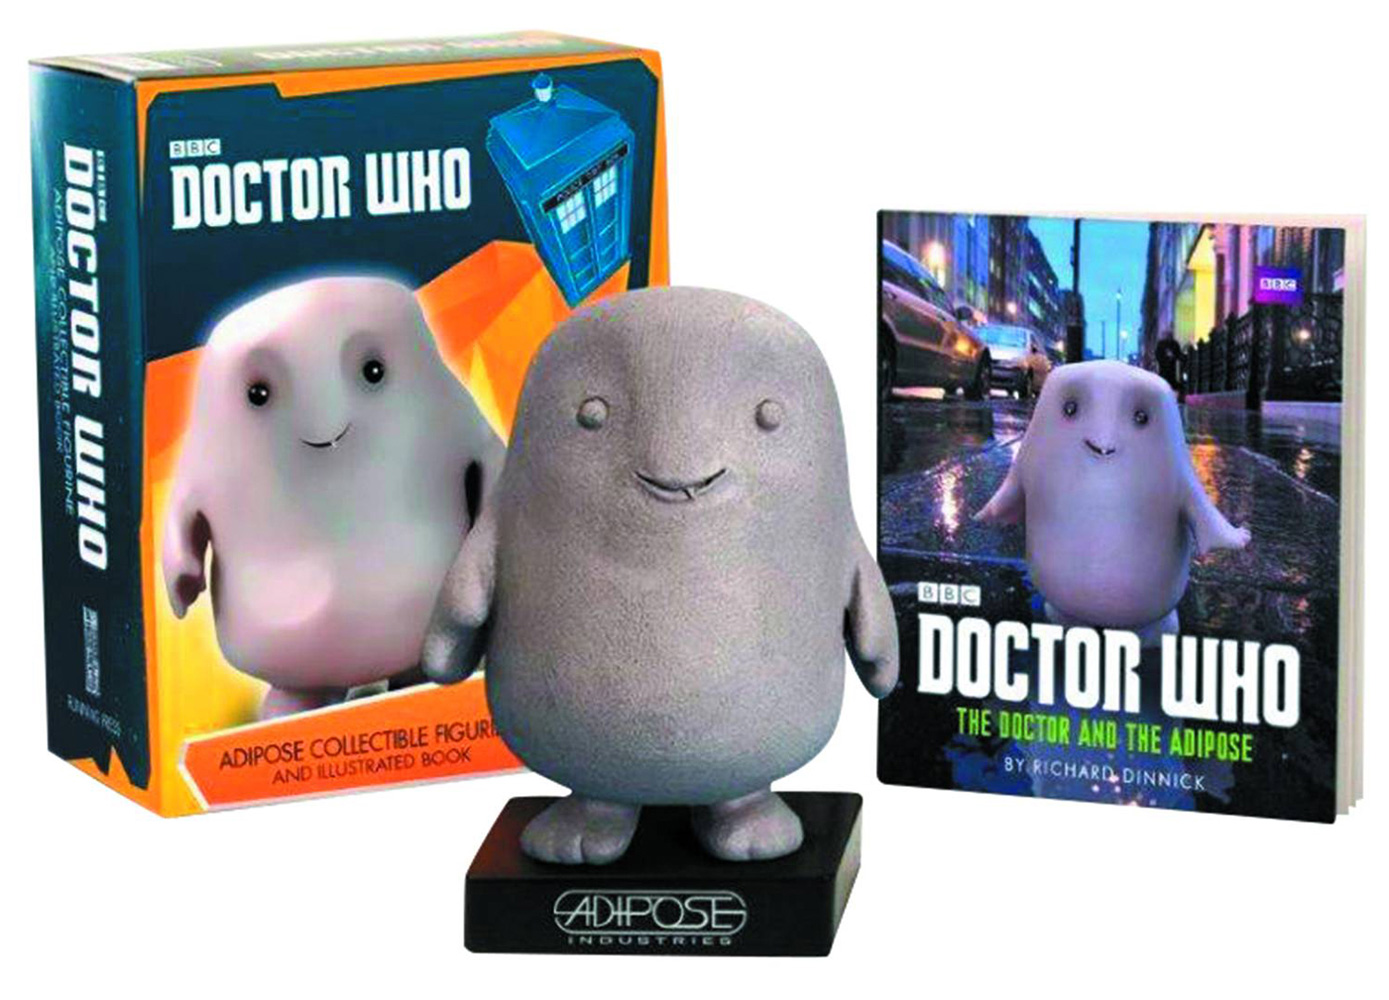 Doctor Who Adipose Collectible Figurine & Illustrated Book Kit 